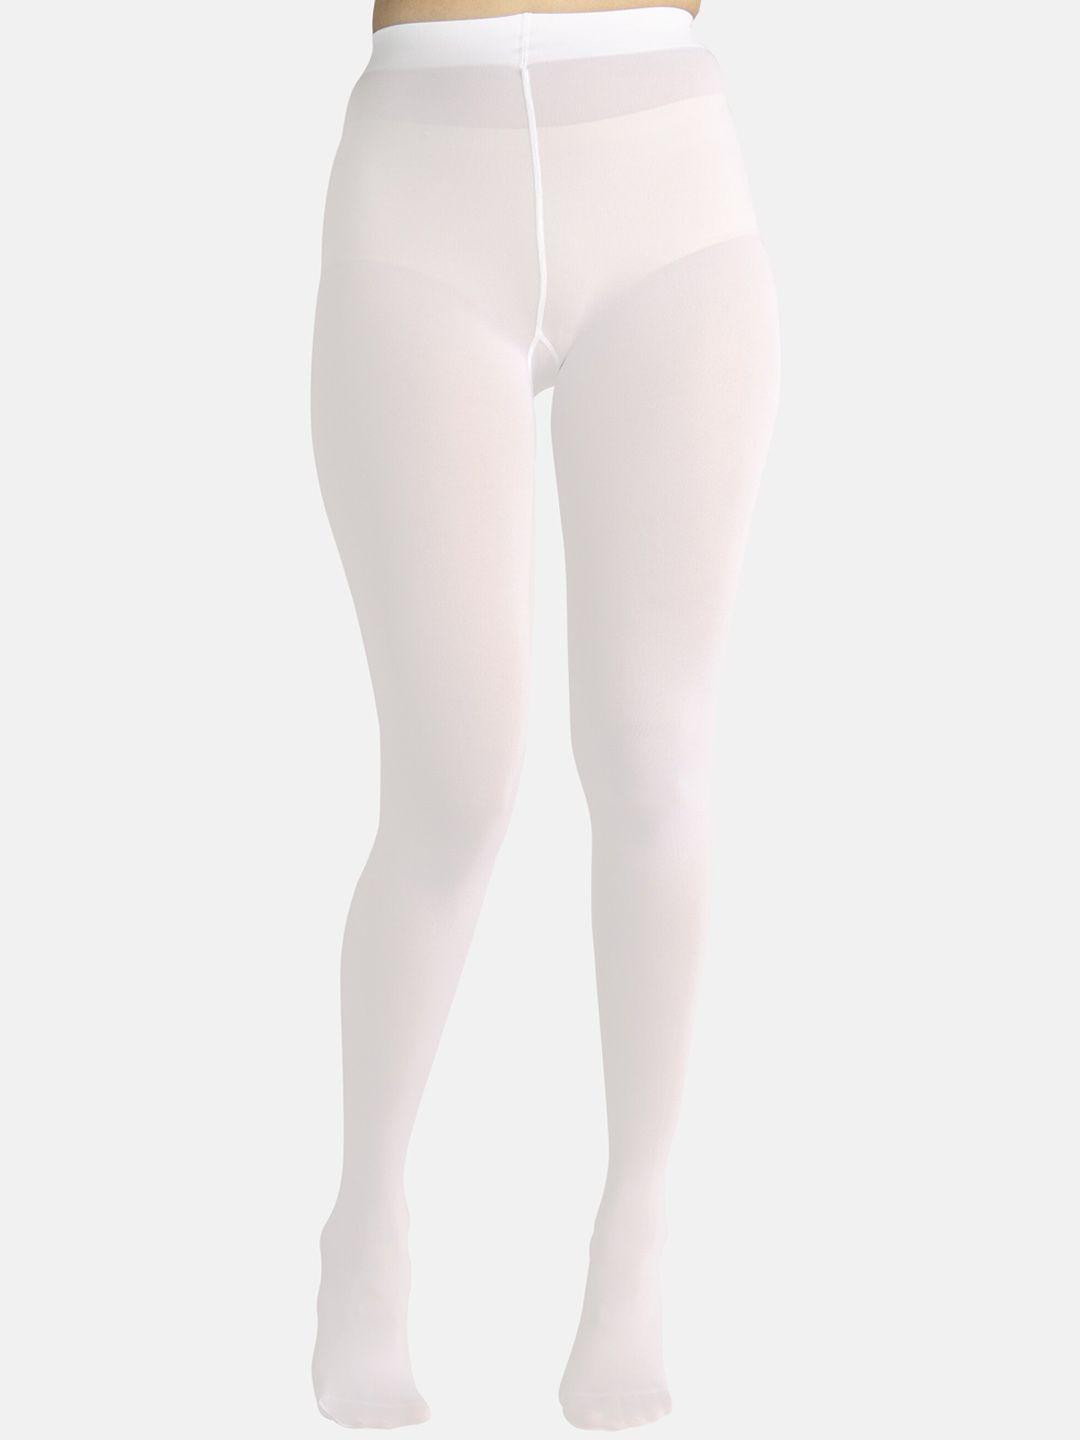 theater women white solid stockings